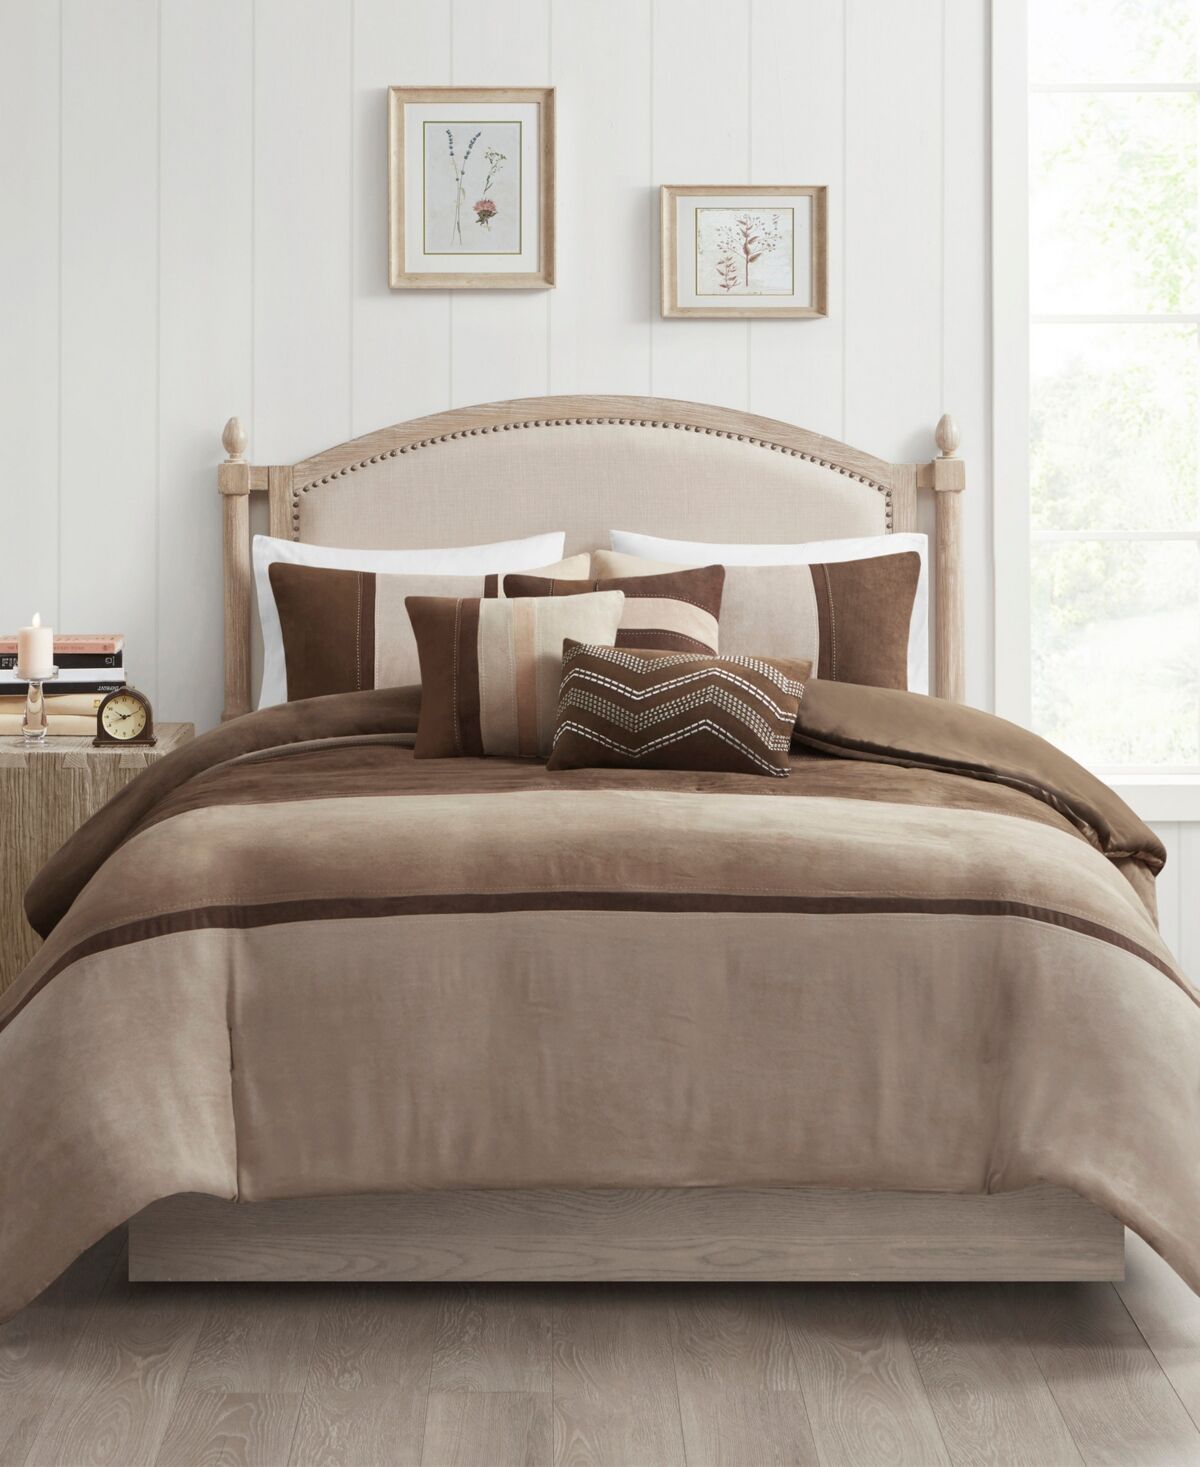 Madison Park Palisades 6-Pc. Duvet Cover Set, Full/Queen - Brown